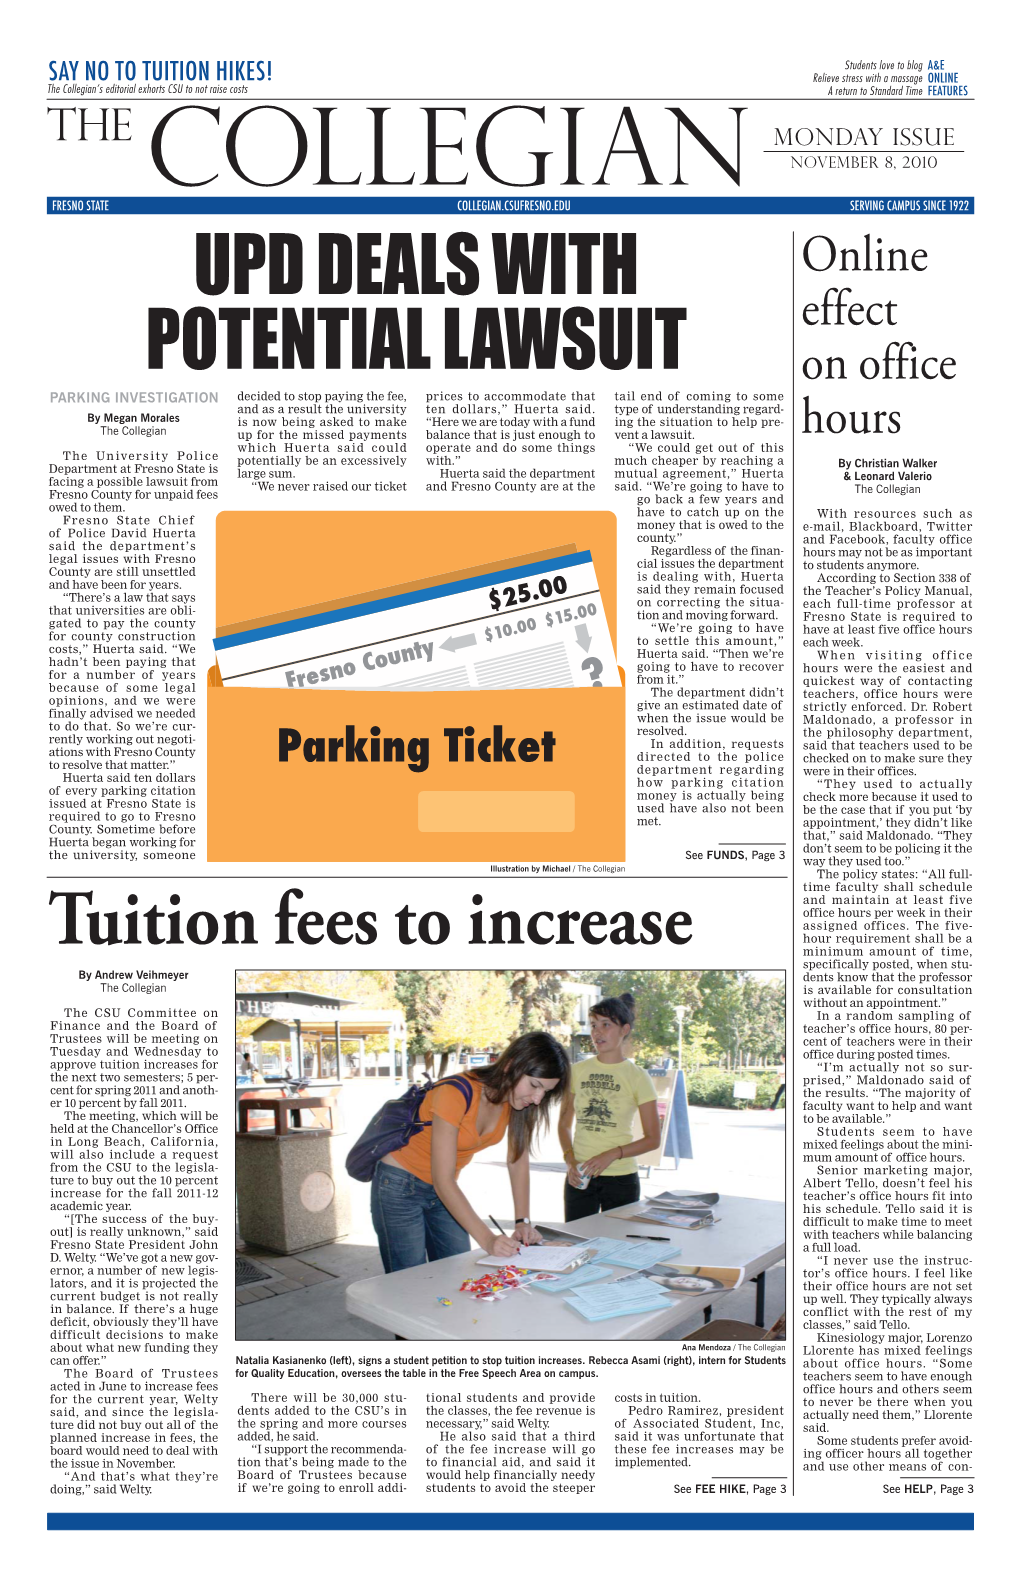 Tuition Fees to Increase UPD DEALS WITH